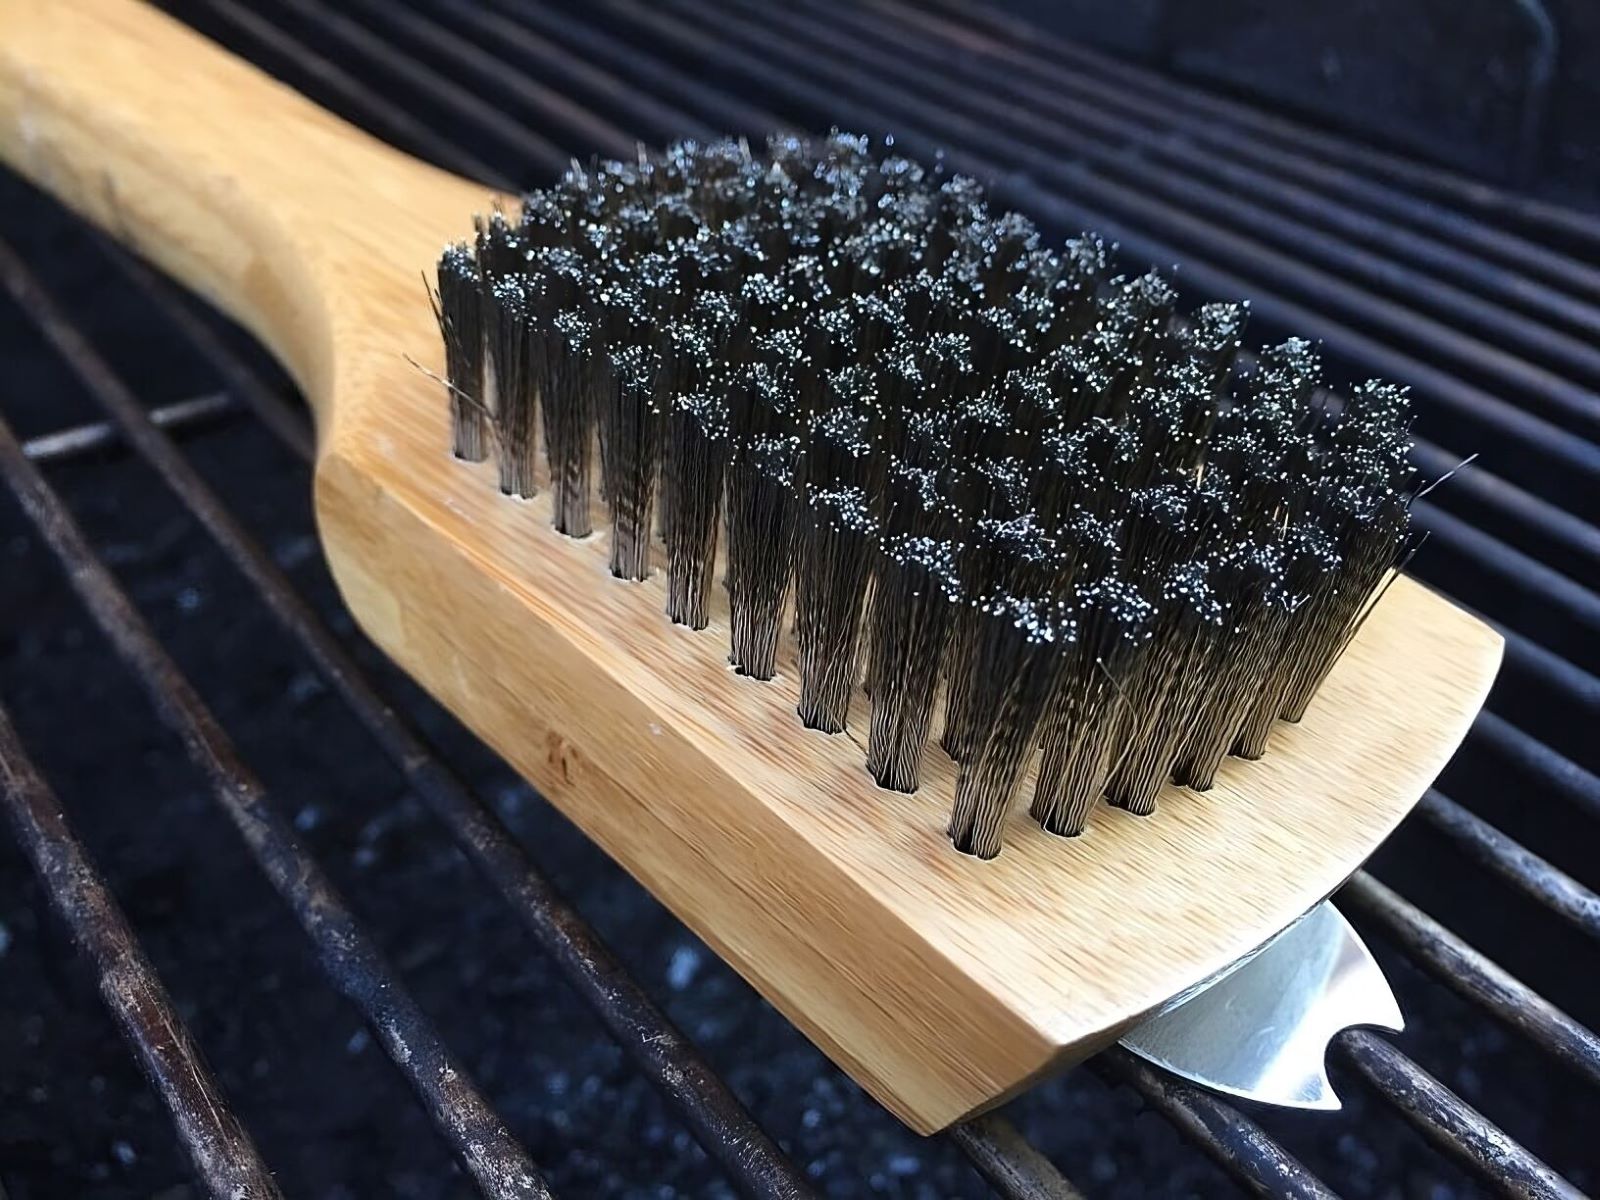  GRILLART Grill Brush Bristle Free & Wire Combined BBQ Brush -  Safe & Efficient Grill Cleaning Brush- 17 Grill Cleaner Brush for  Gas/Porcelain/Charbroil Grates - BBQ Accessories Gifts for Men 